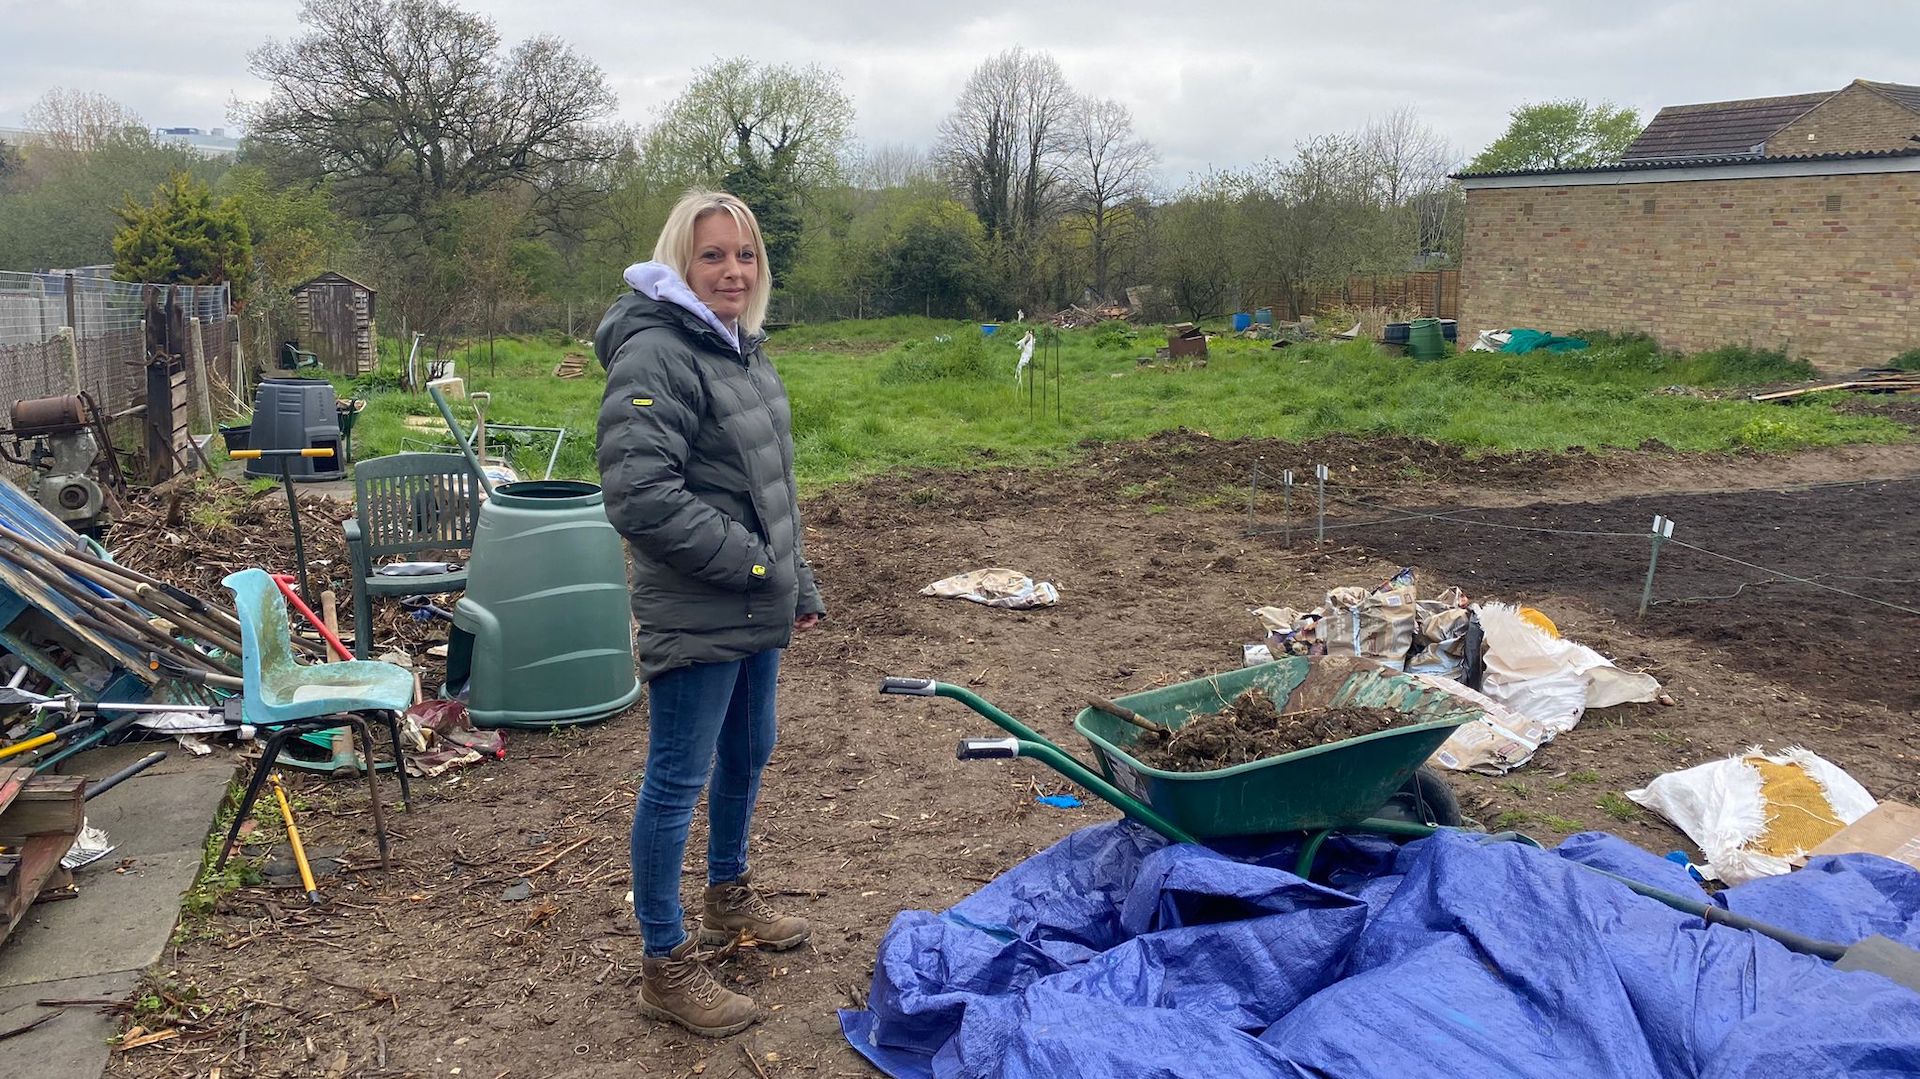 Carly Burd standing in a down jacket, jeans, and boots next to a wheelbarrow full of soil in her allotment